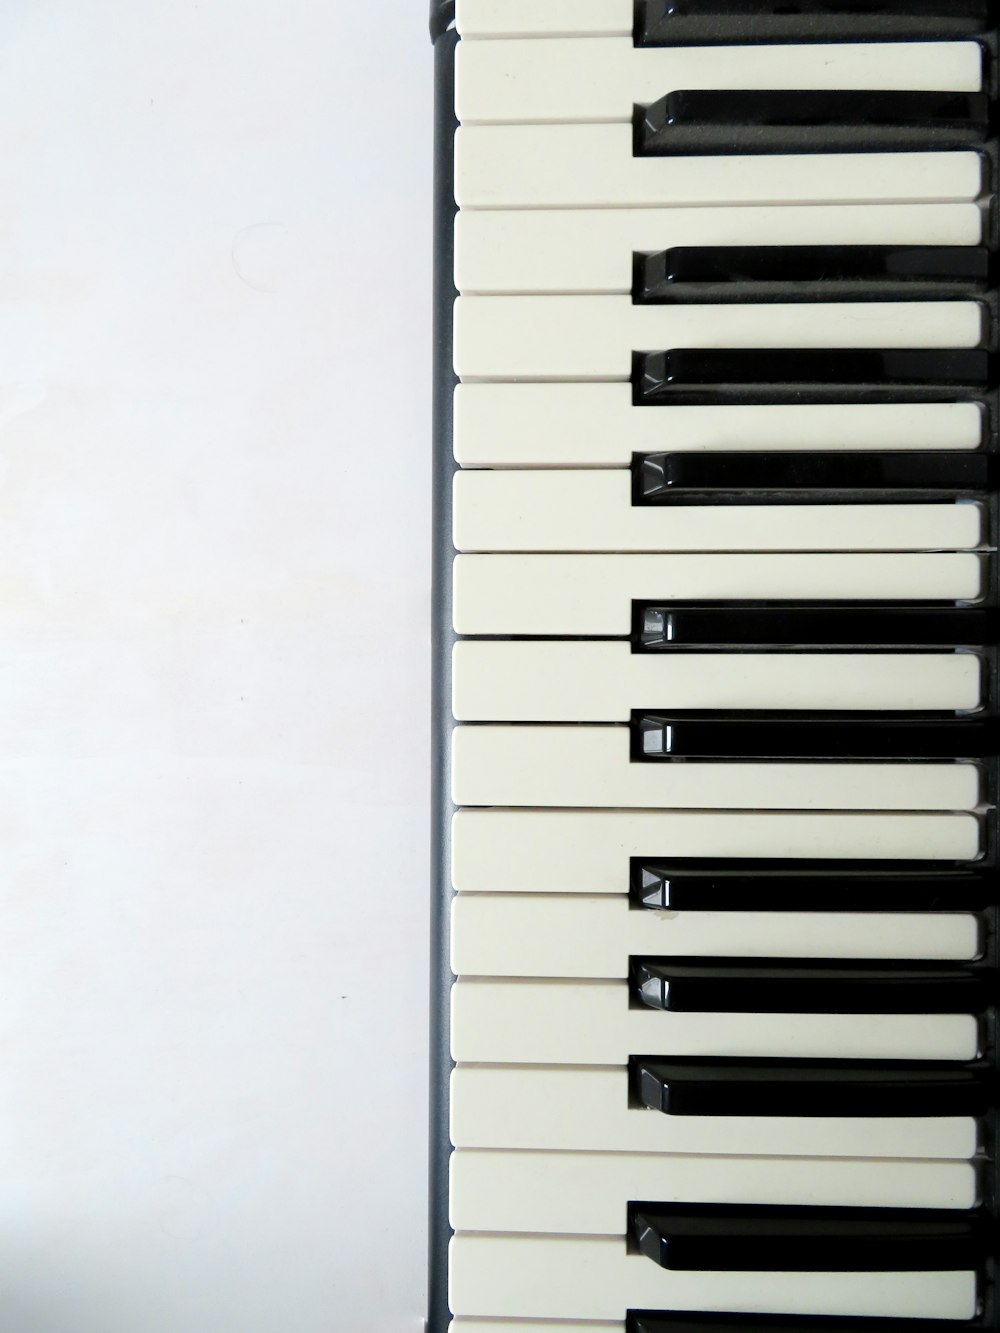 Piano Key Pictures | Download Free Images on Unsplash